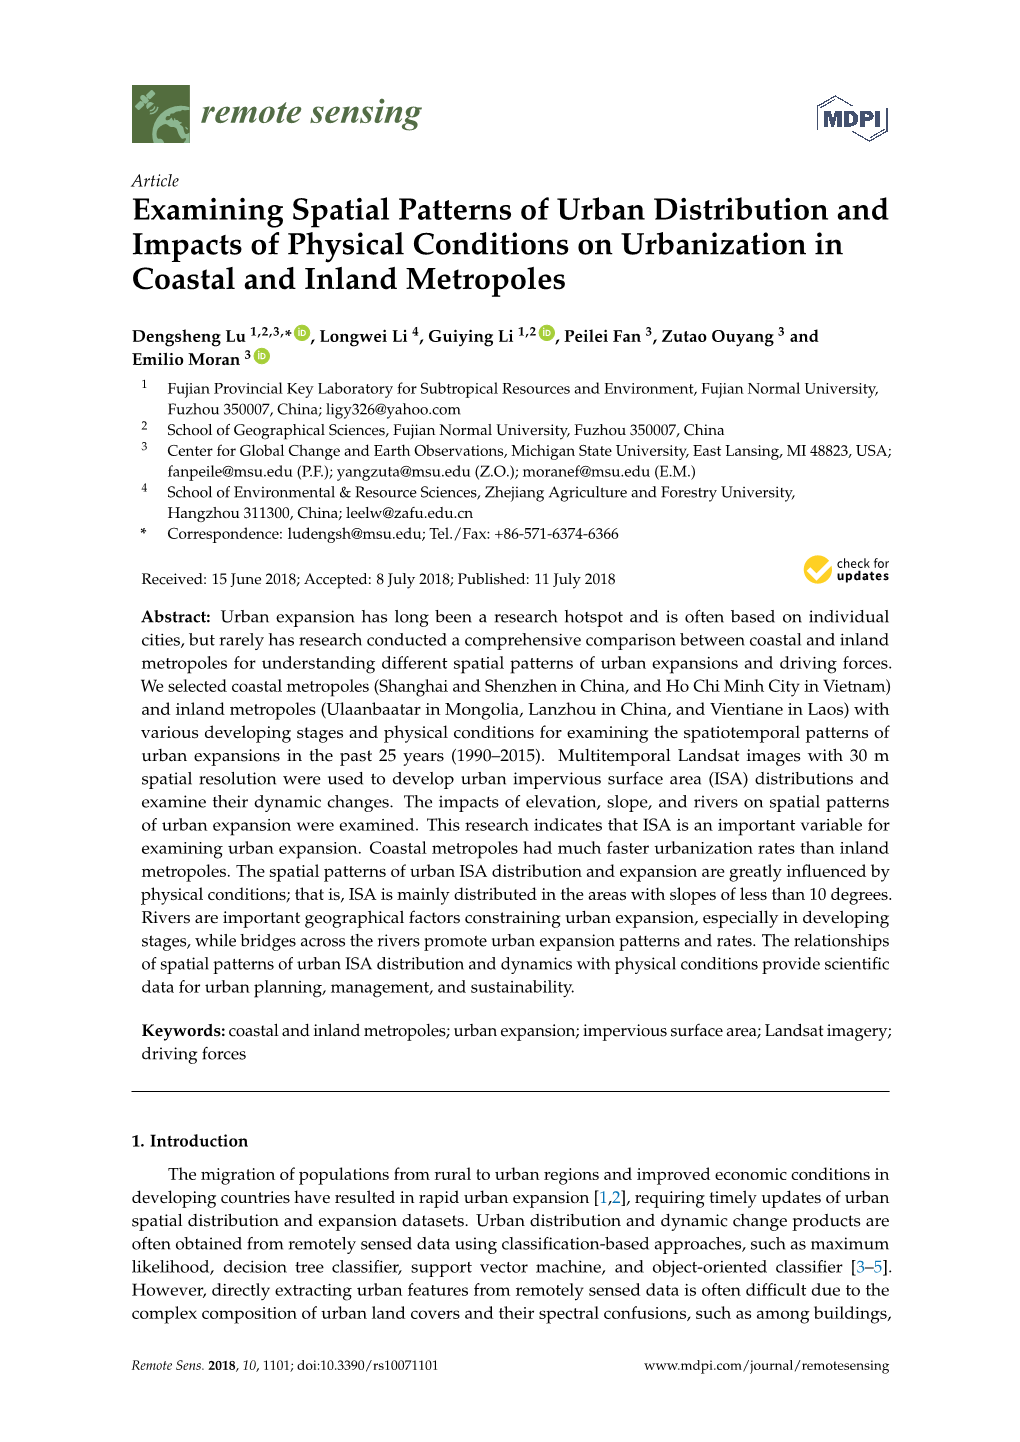 Examining Spatial Patterns of Urban Distribution and Impacts of Physical Conditions on Urbanization in Coastal and Inland Metropoles